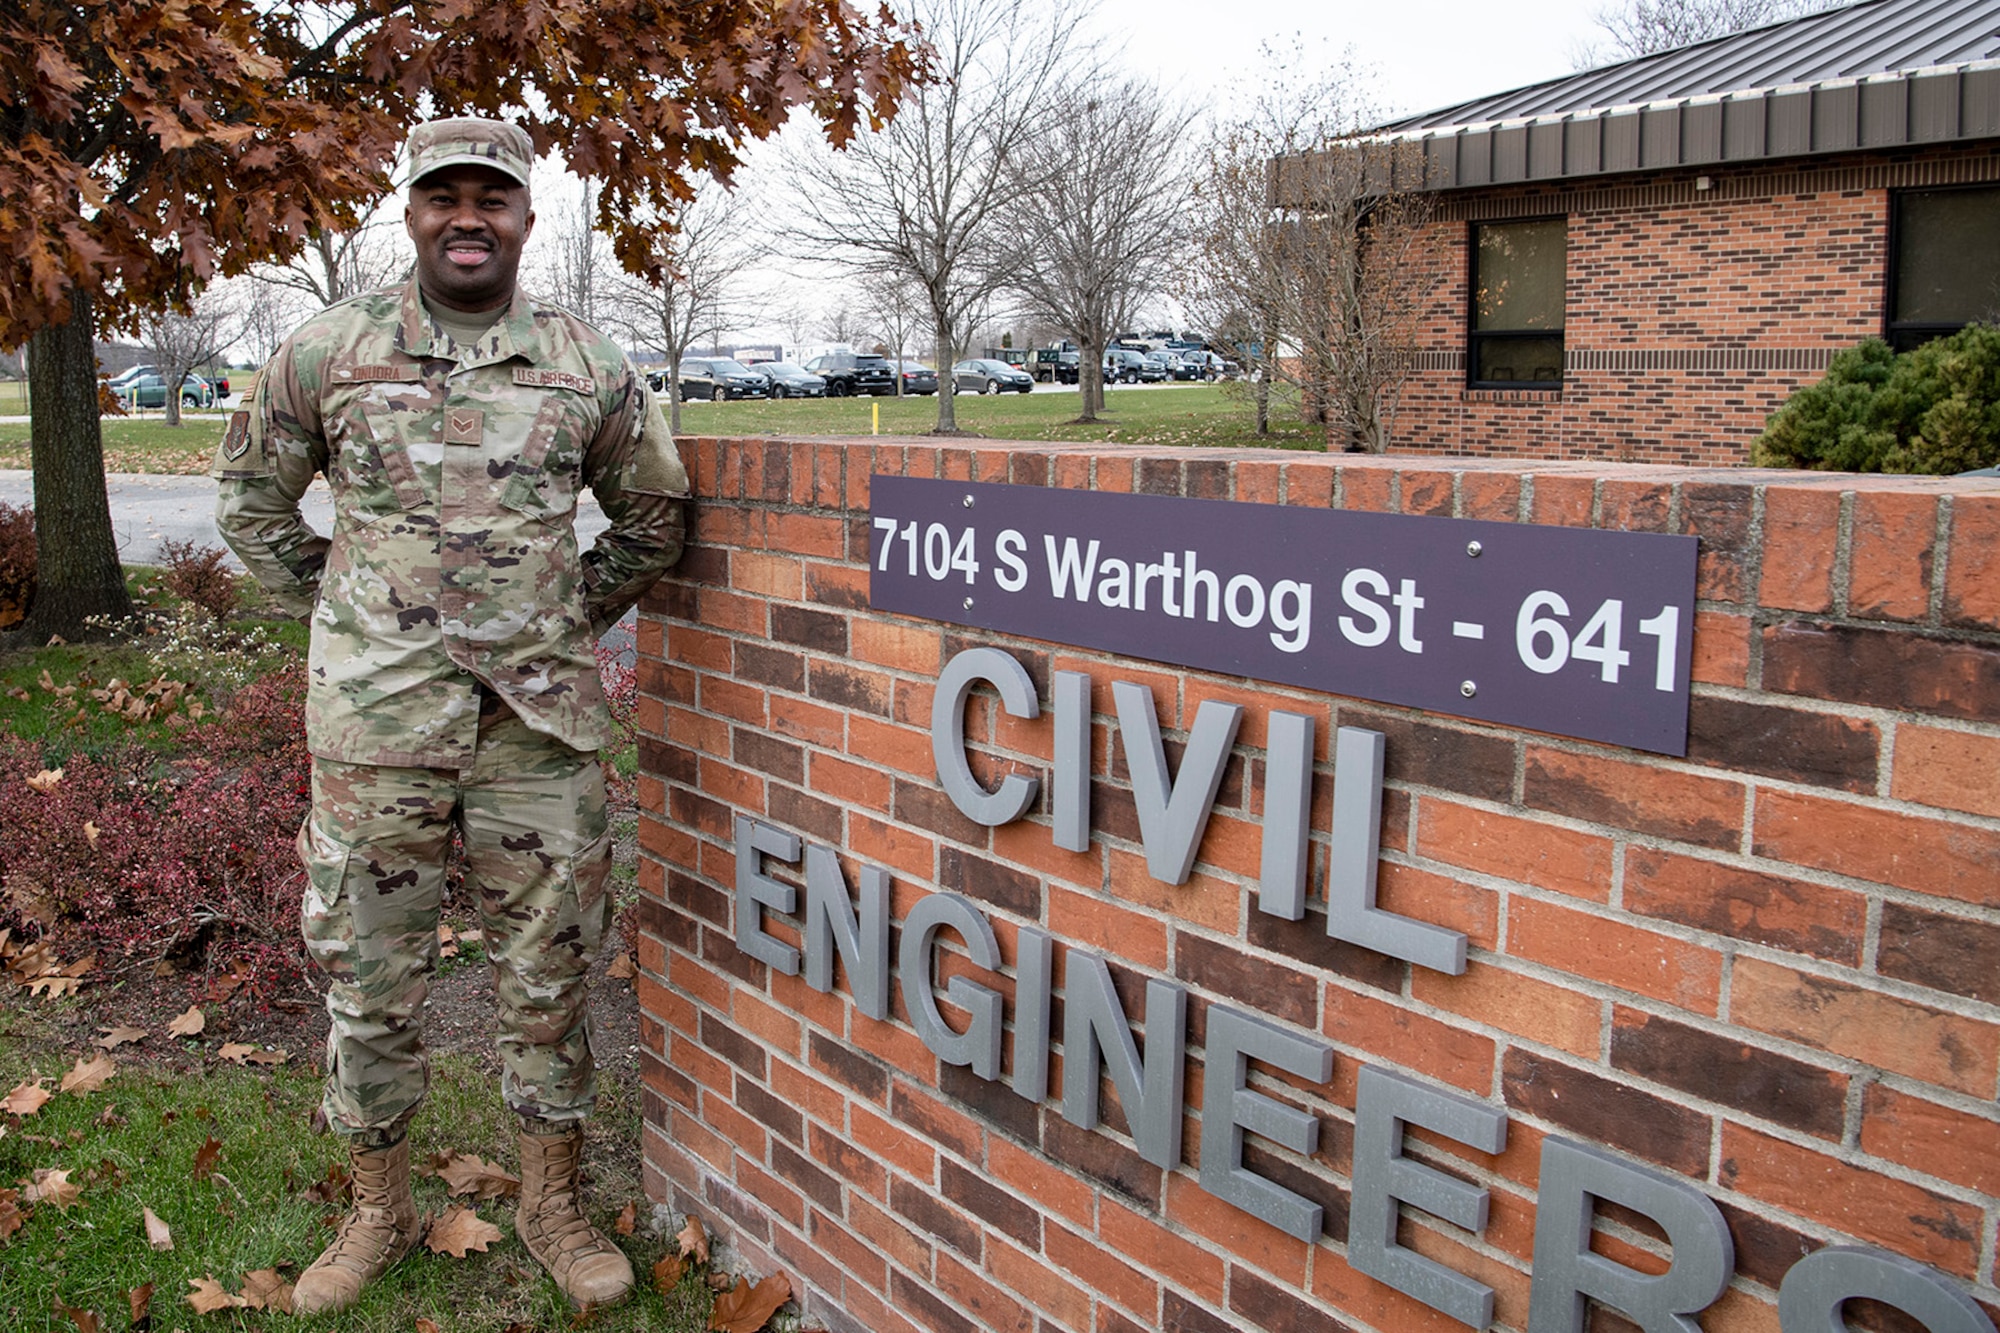 Senior Airman Gentle Onuora is a pest management specialist for the 434th Civil Engineer Squadron at Grissom Air Reserve Base, Indiana. Born in Nigeria, Onuora moved to the United States in 2015. On October 13, 2021 he obtained U.S. citizenship through his military service. (U.S. Air Force photo by Master Sgt. Rachel Barton)